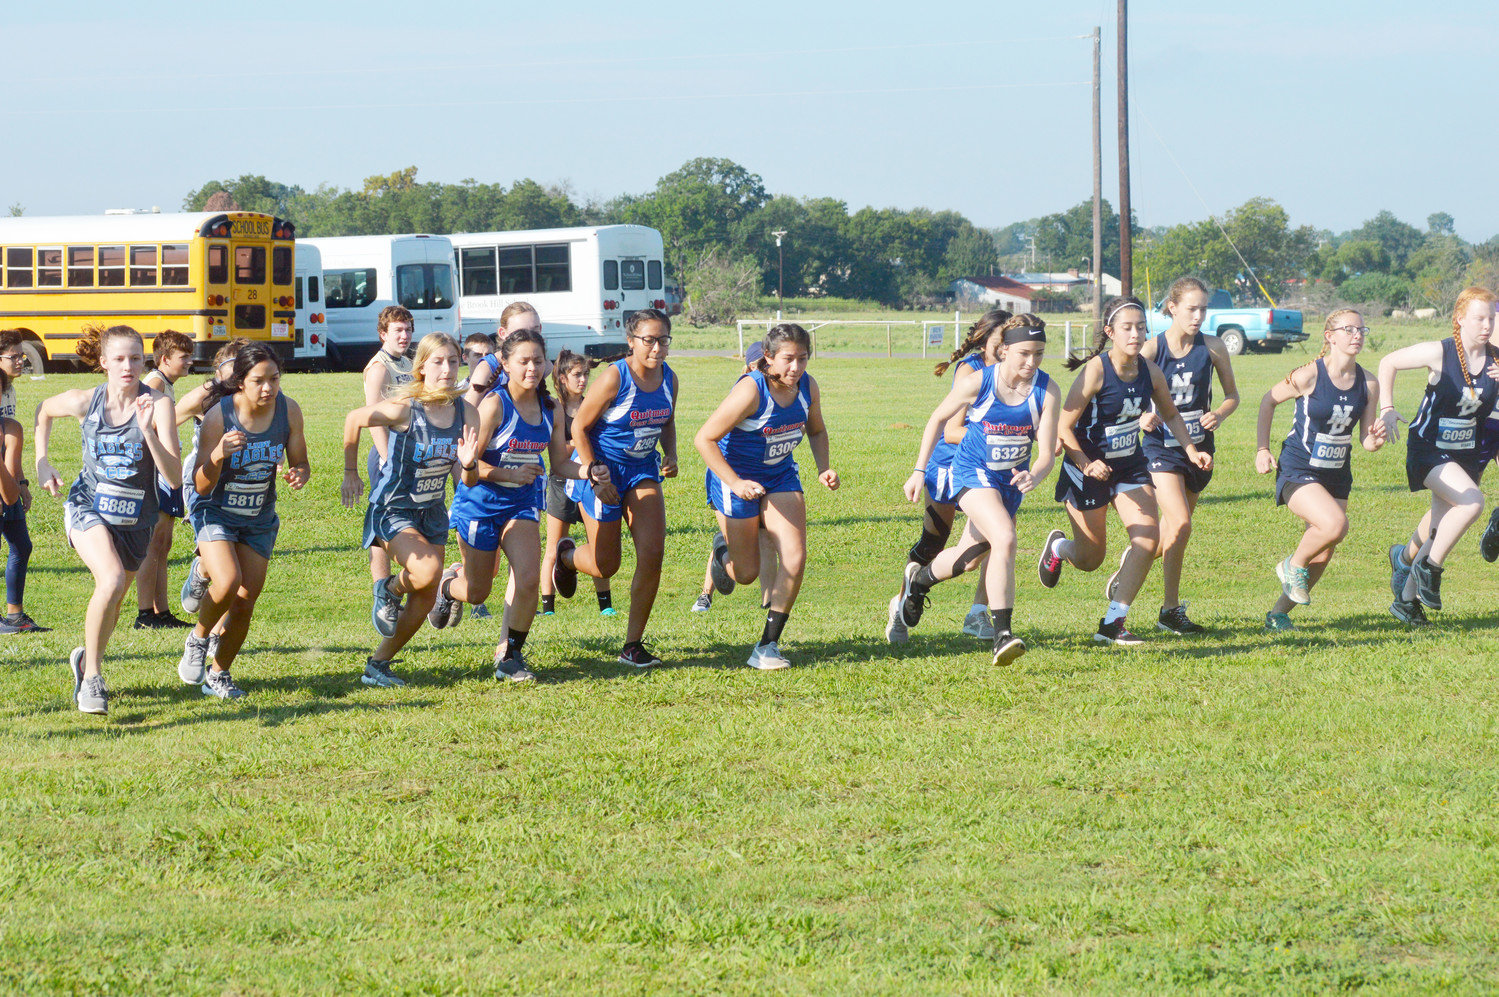 And they are off! There were 13 cross country teams at the Frist Annual Quitman cross country meet last Thursday. (Monitor photos by Larry Tucker)